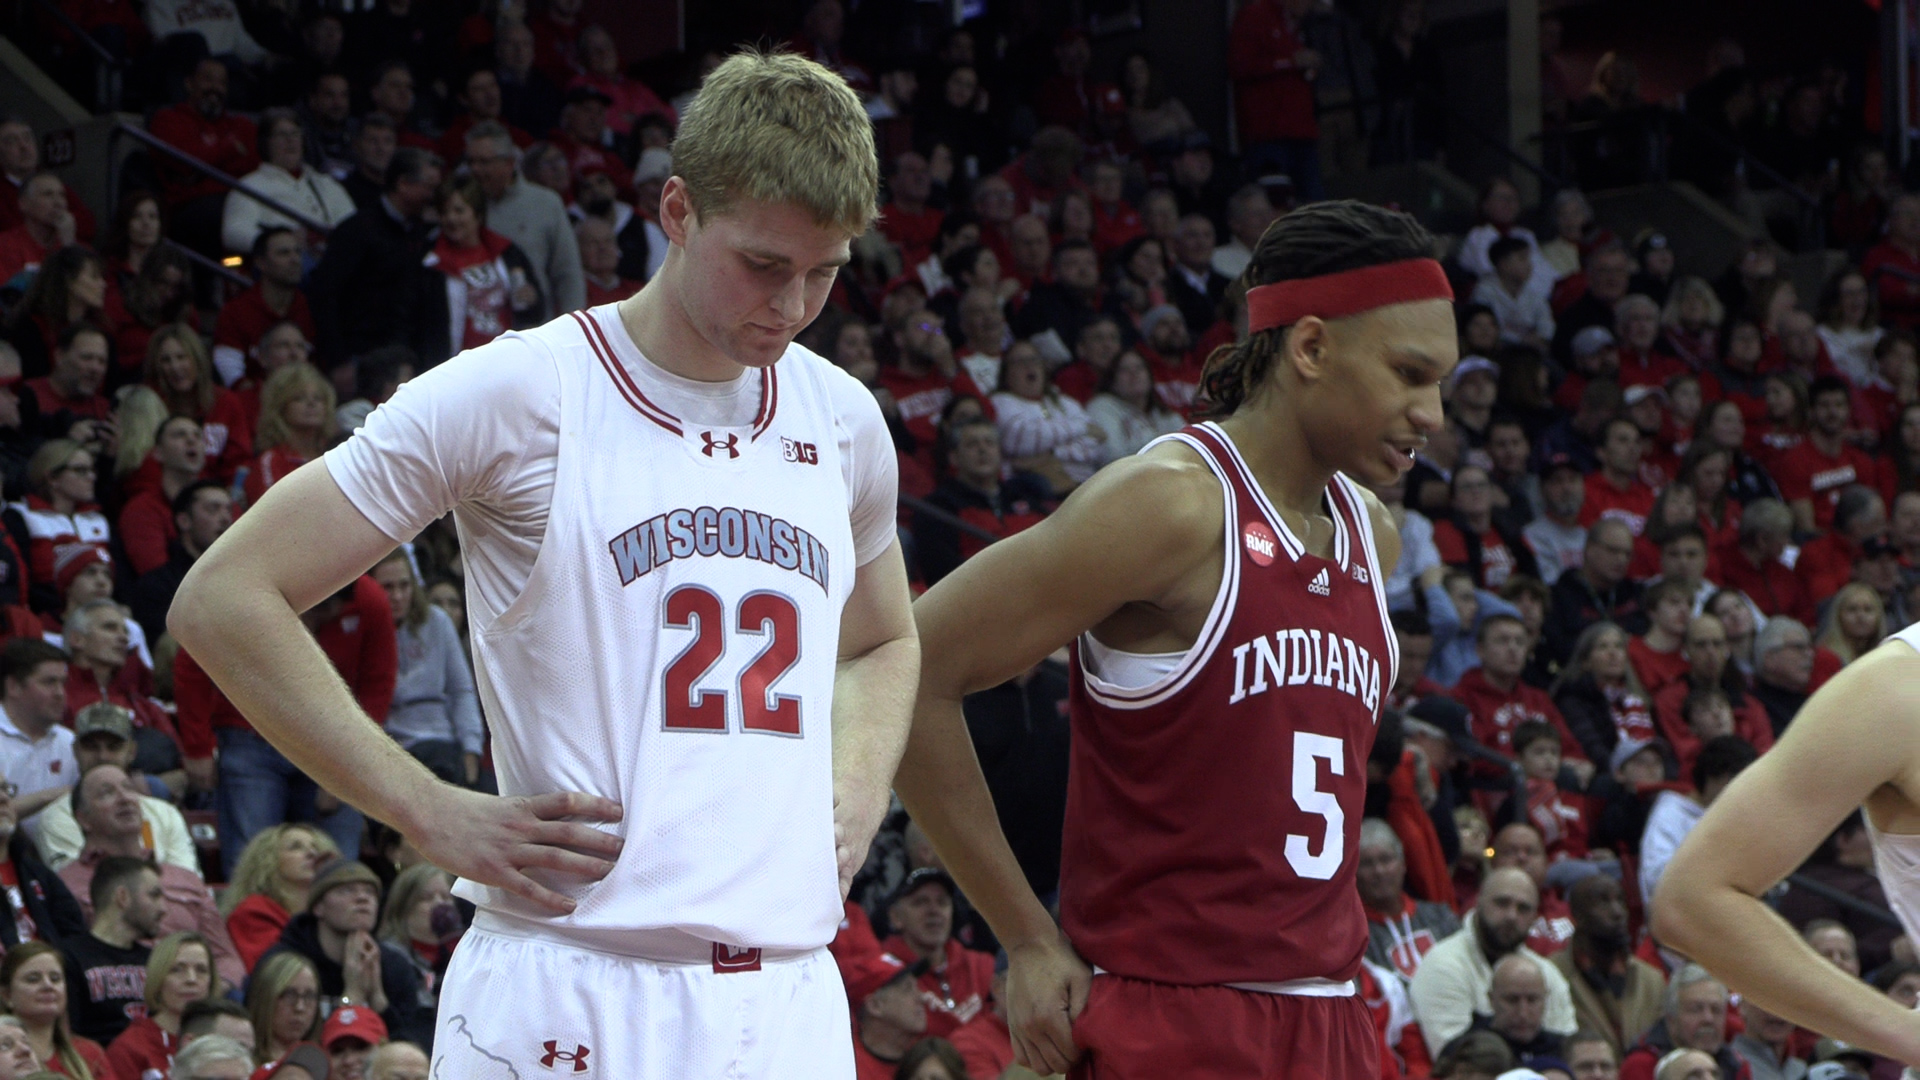 Season problems highlighted as Wisconsin rolls Indiana